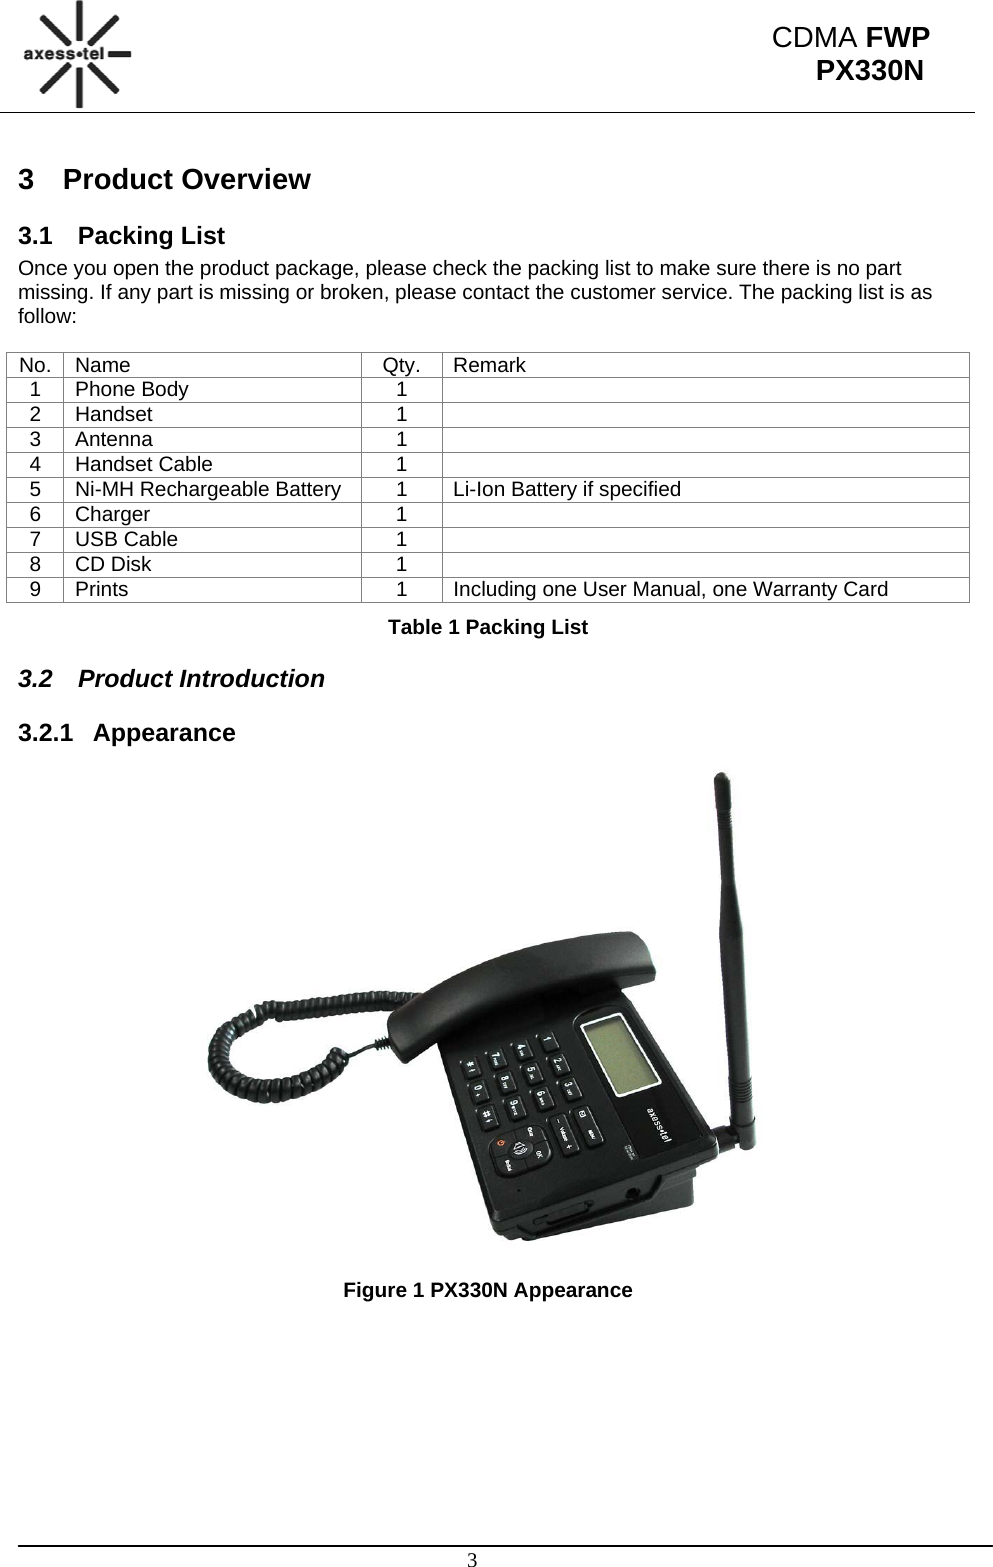                                                                                                      3 CDMA FWP PX330N3 Product Overview 3.1 Packing List Once you open the product package, please check the packing list to make sure there is no part missing. If any part is missing or broken, please contact the customer service. The packing list is as follow:  No. Name  Qty.  Remark 1 Phone Body  1   2 Handset  1   3 Antenna  1   4 Handset Cable  1   5  Ni-MH Rechargeable Battery  1  Li-Ion Battery if specified 6 Charger  1   7 USB Cable  1   8 CD Disk  1   9  Prints  1  Including one User Manual, one Warranty Card Table 1 Packing List 3.2 Product Introduction 3.2.1 Appearance  Figure 1 PX330N Appearance 